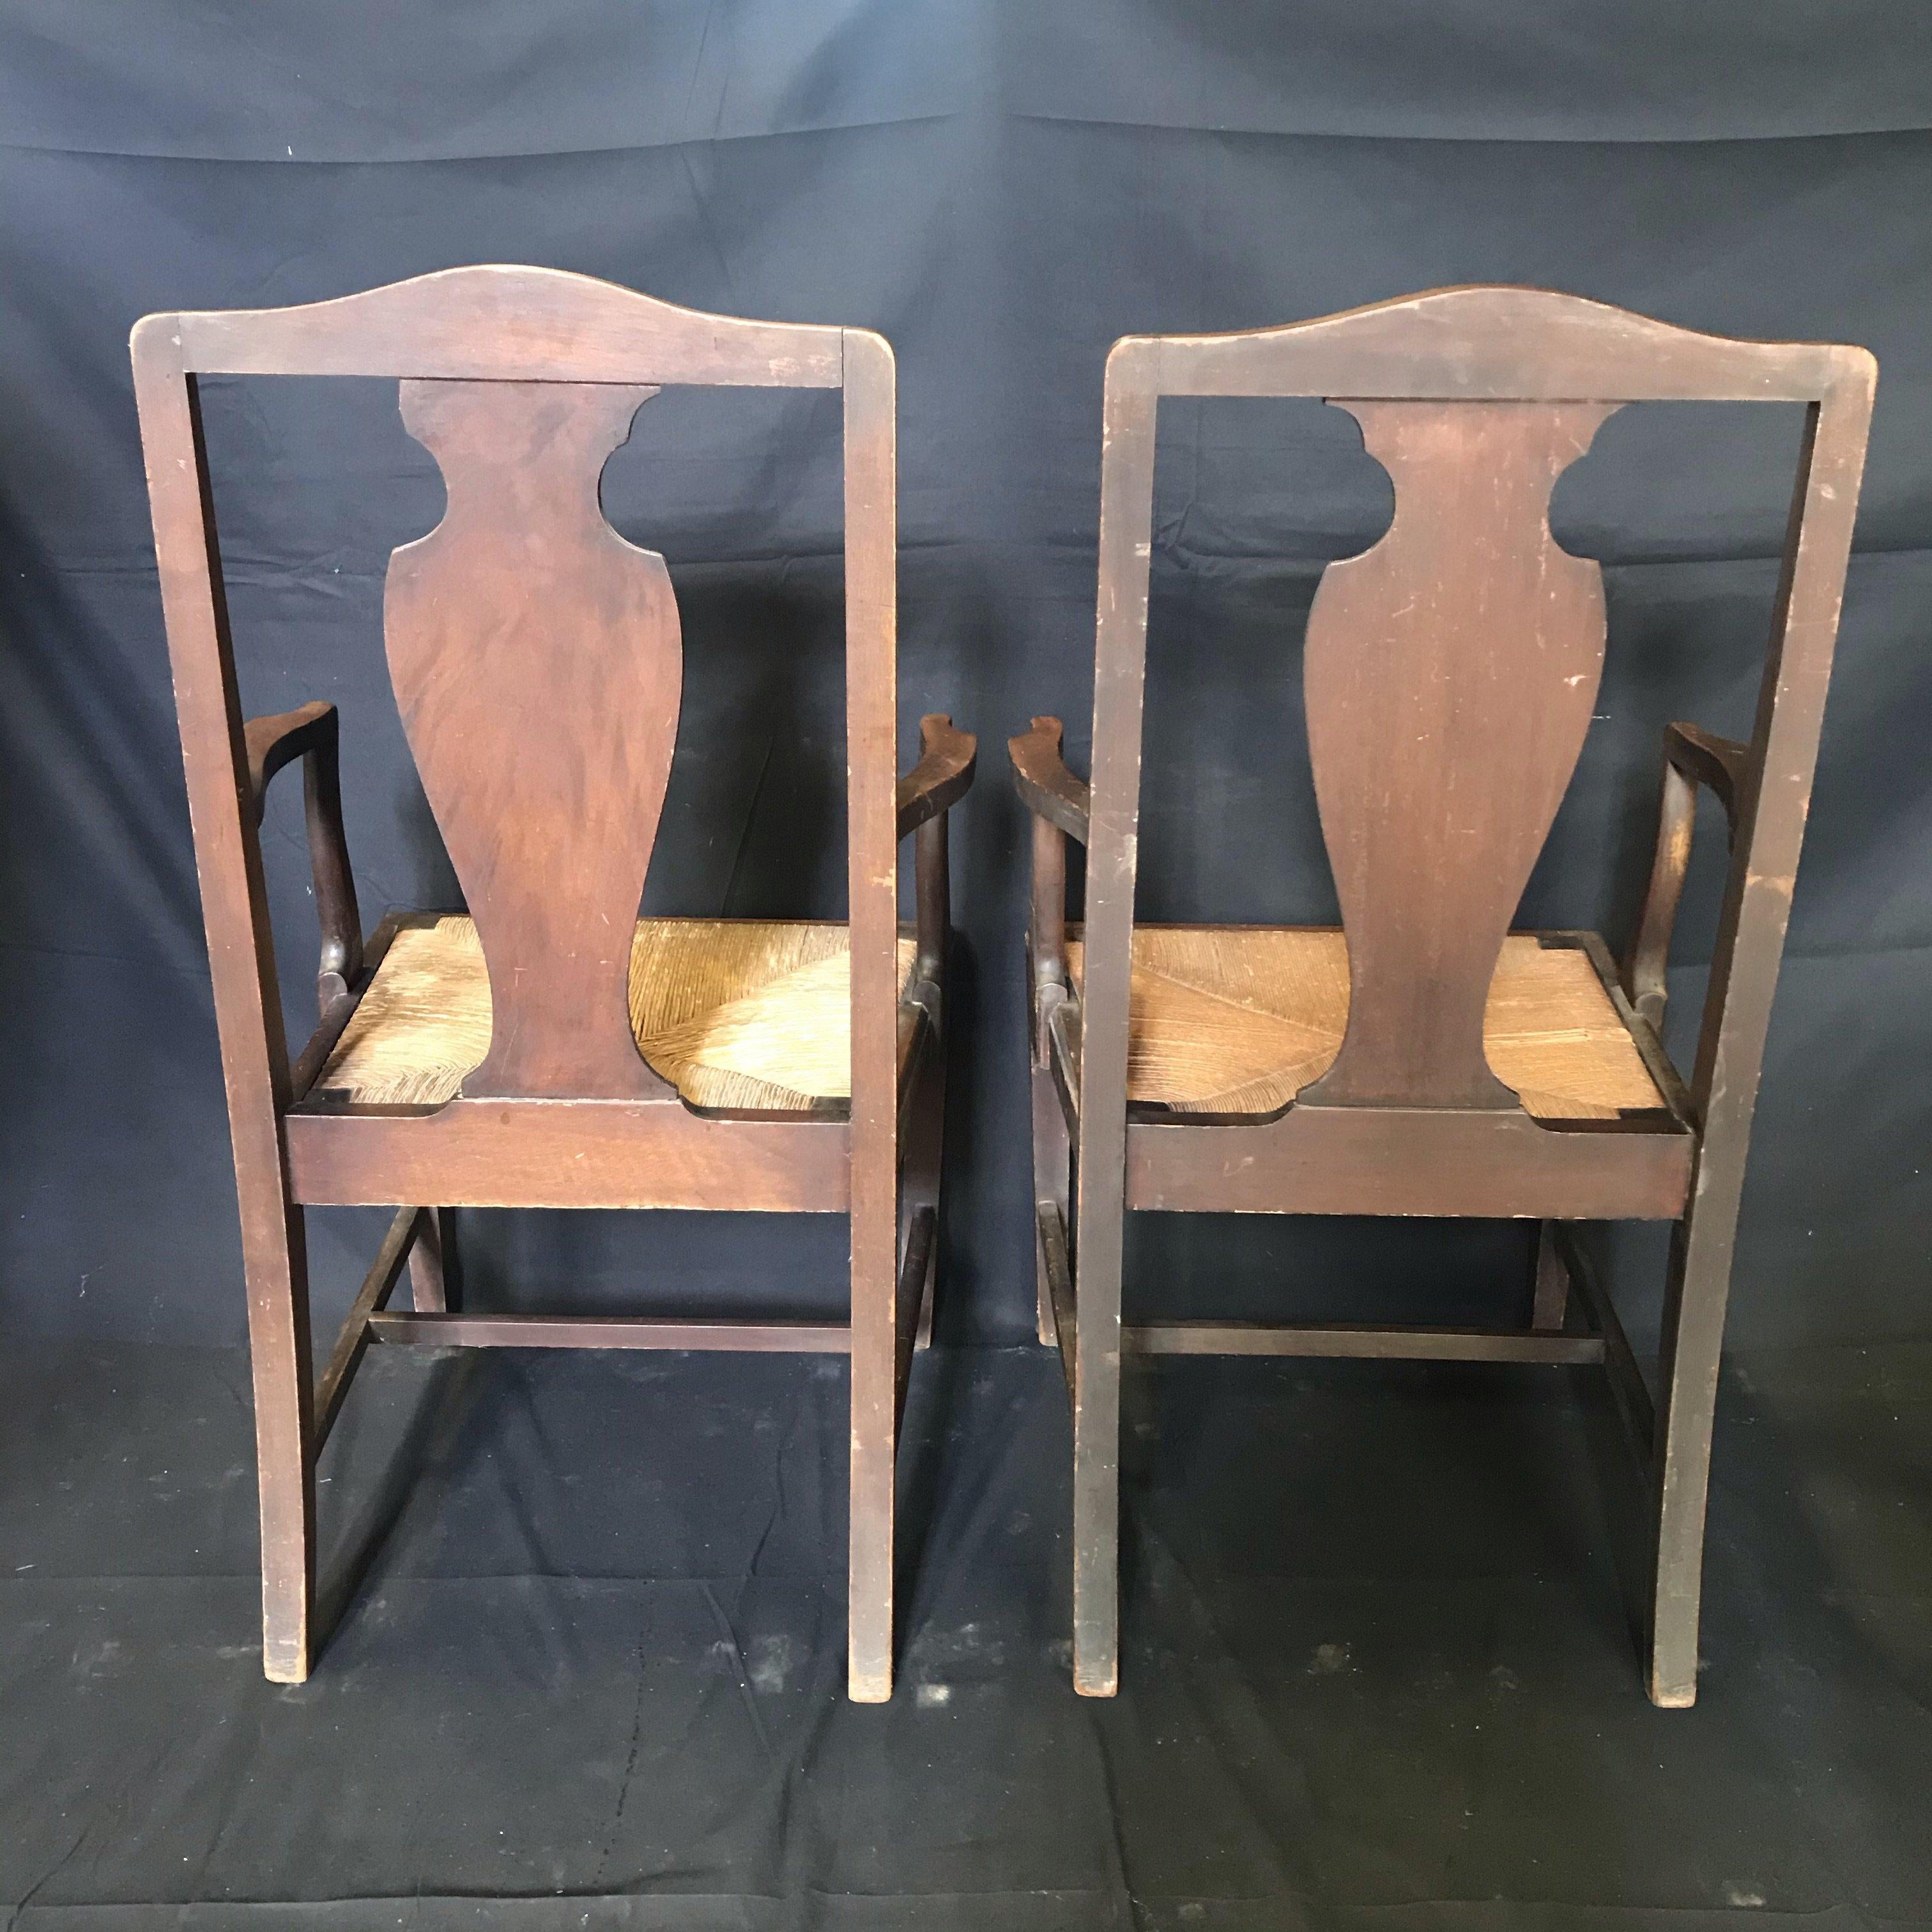 Very handsome set of two early British armchairs in Chippendale style with solid urn-shaped back splats and turned front legs with stretchers. They retain their original finish and rush seats in good shape, and are in very fine vintage condition,